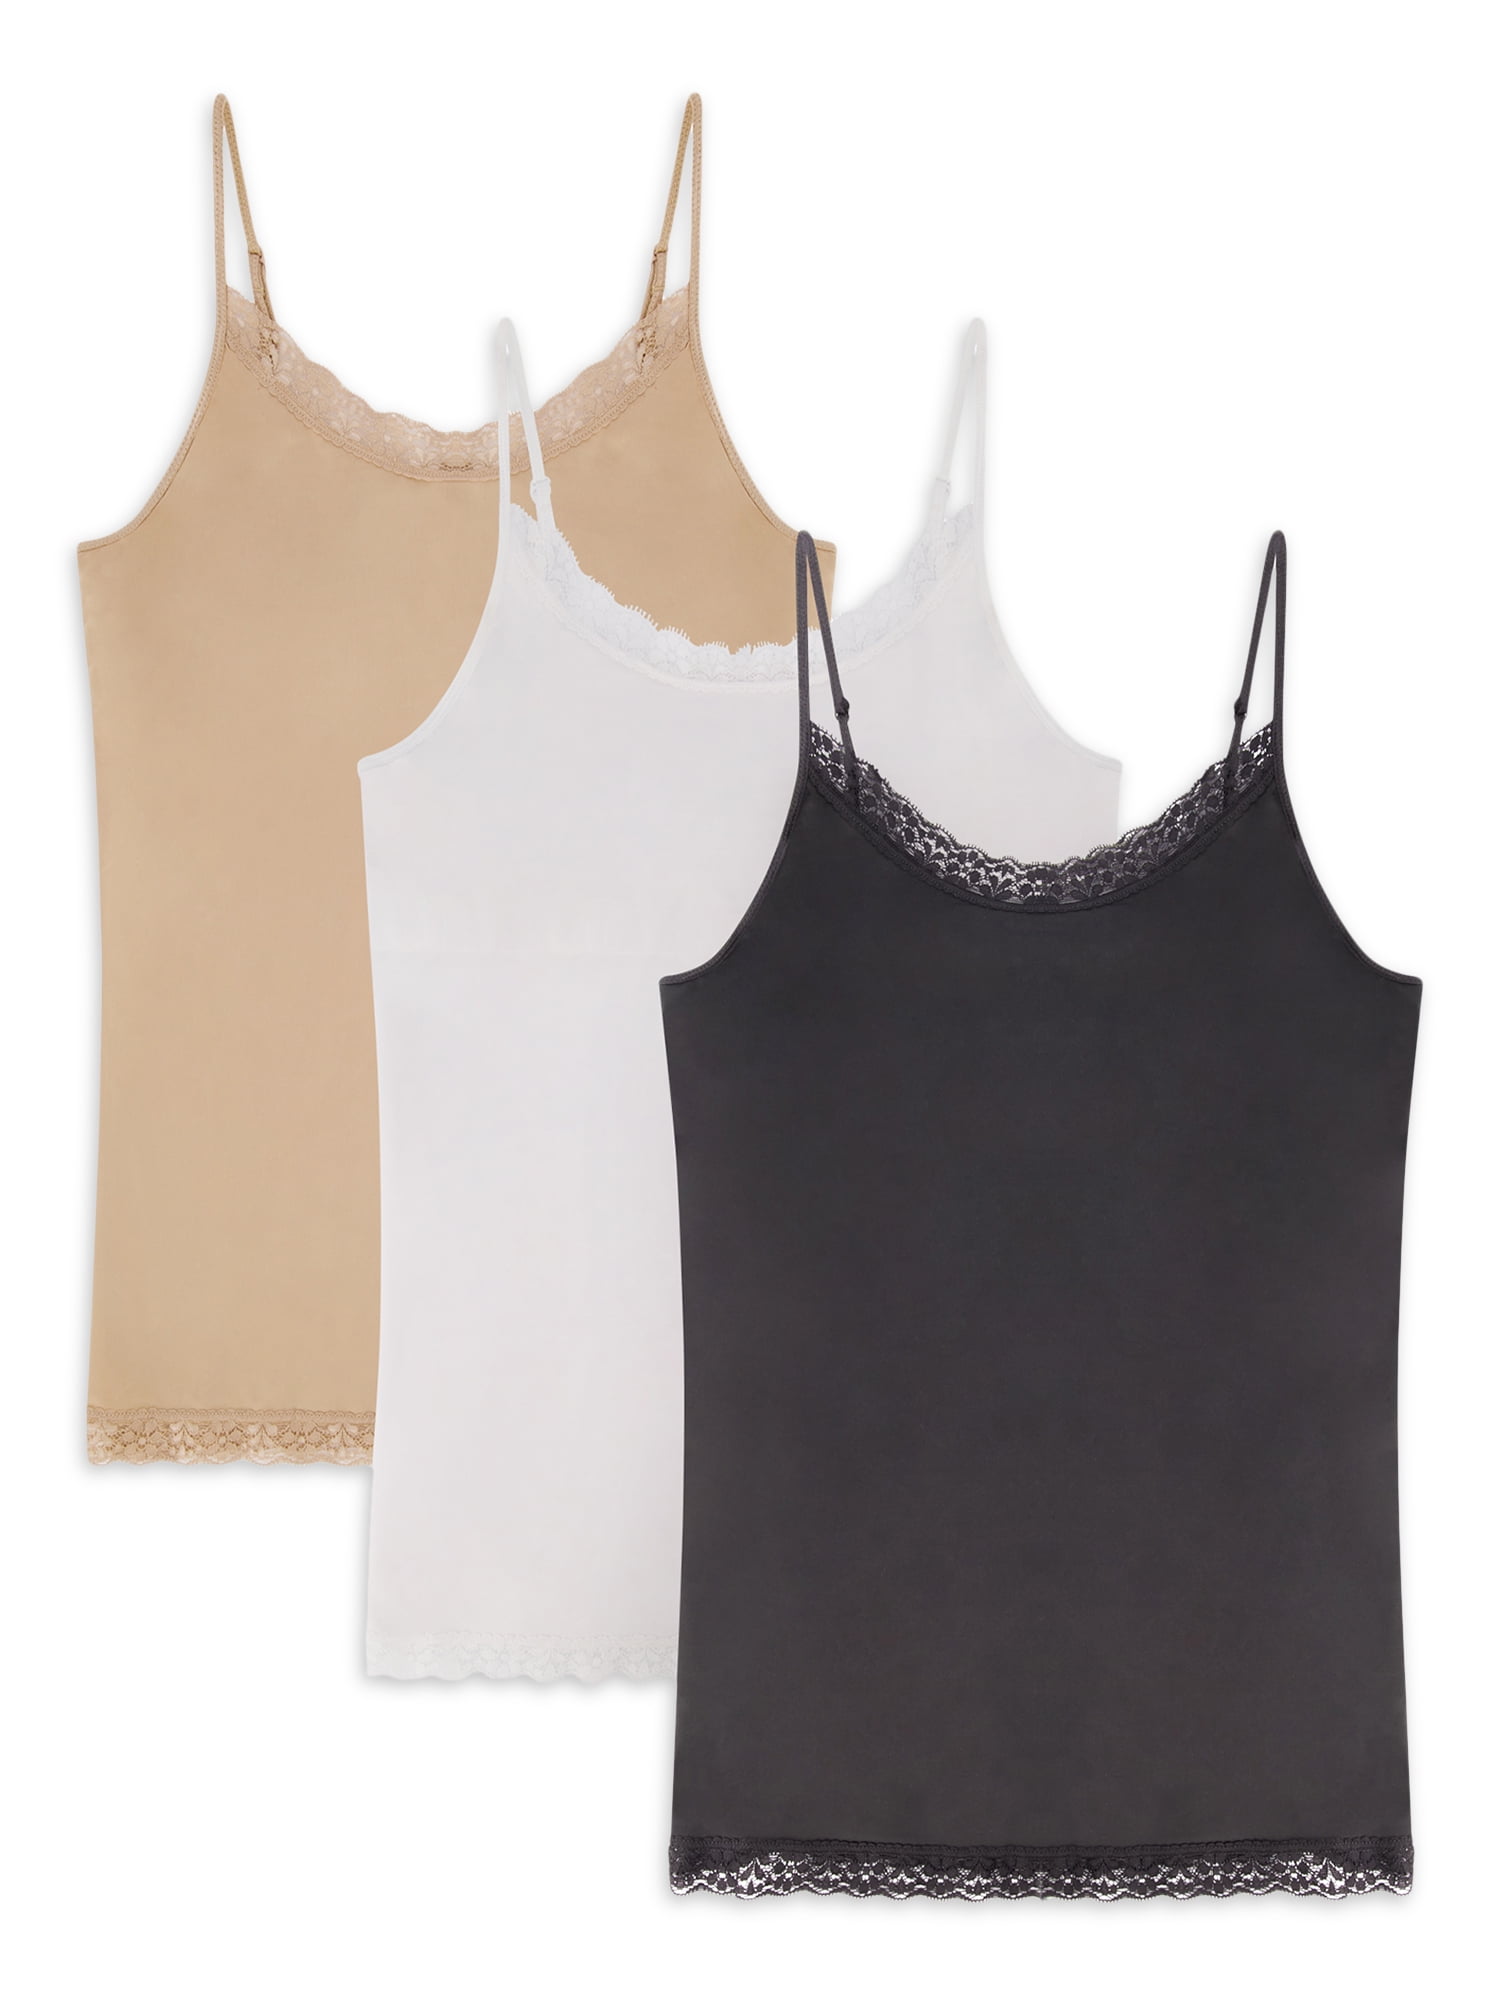 SHAPEVIVA 3 Pack Tank Top with Built in Bra Cami for Women Basic